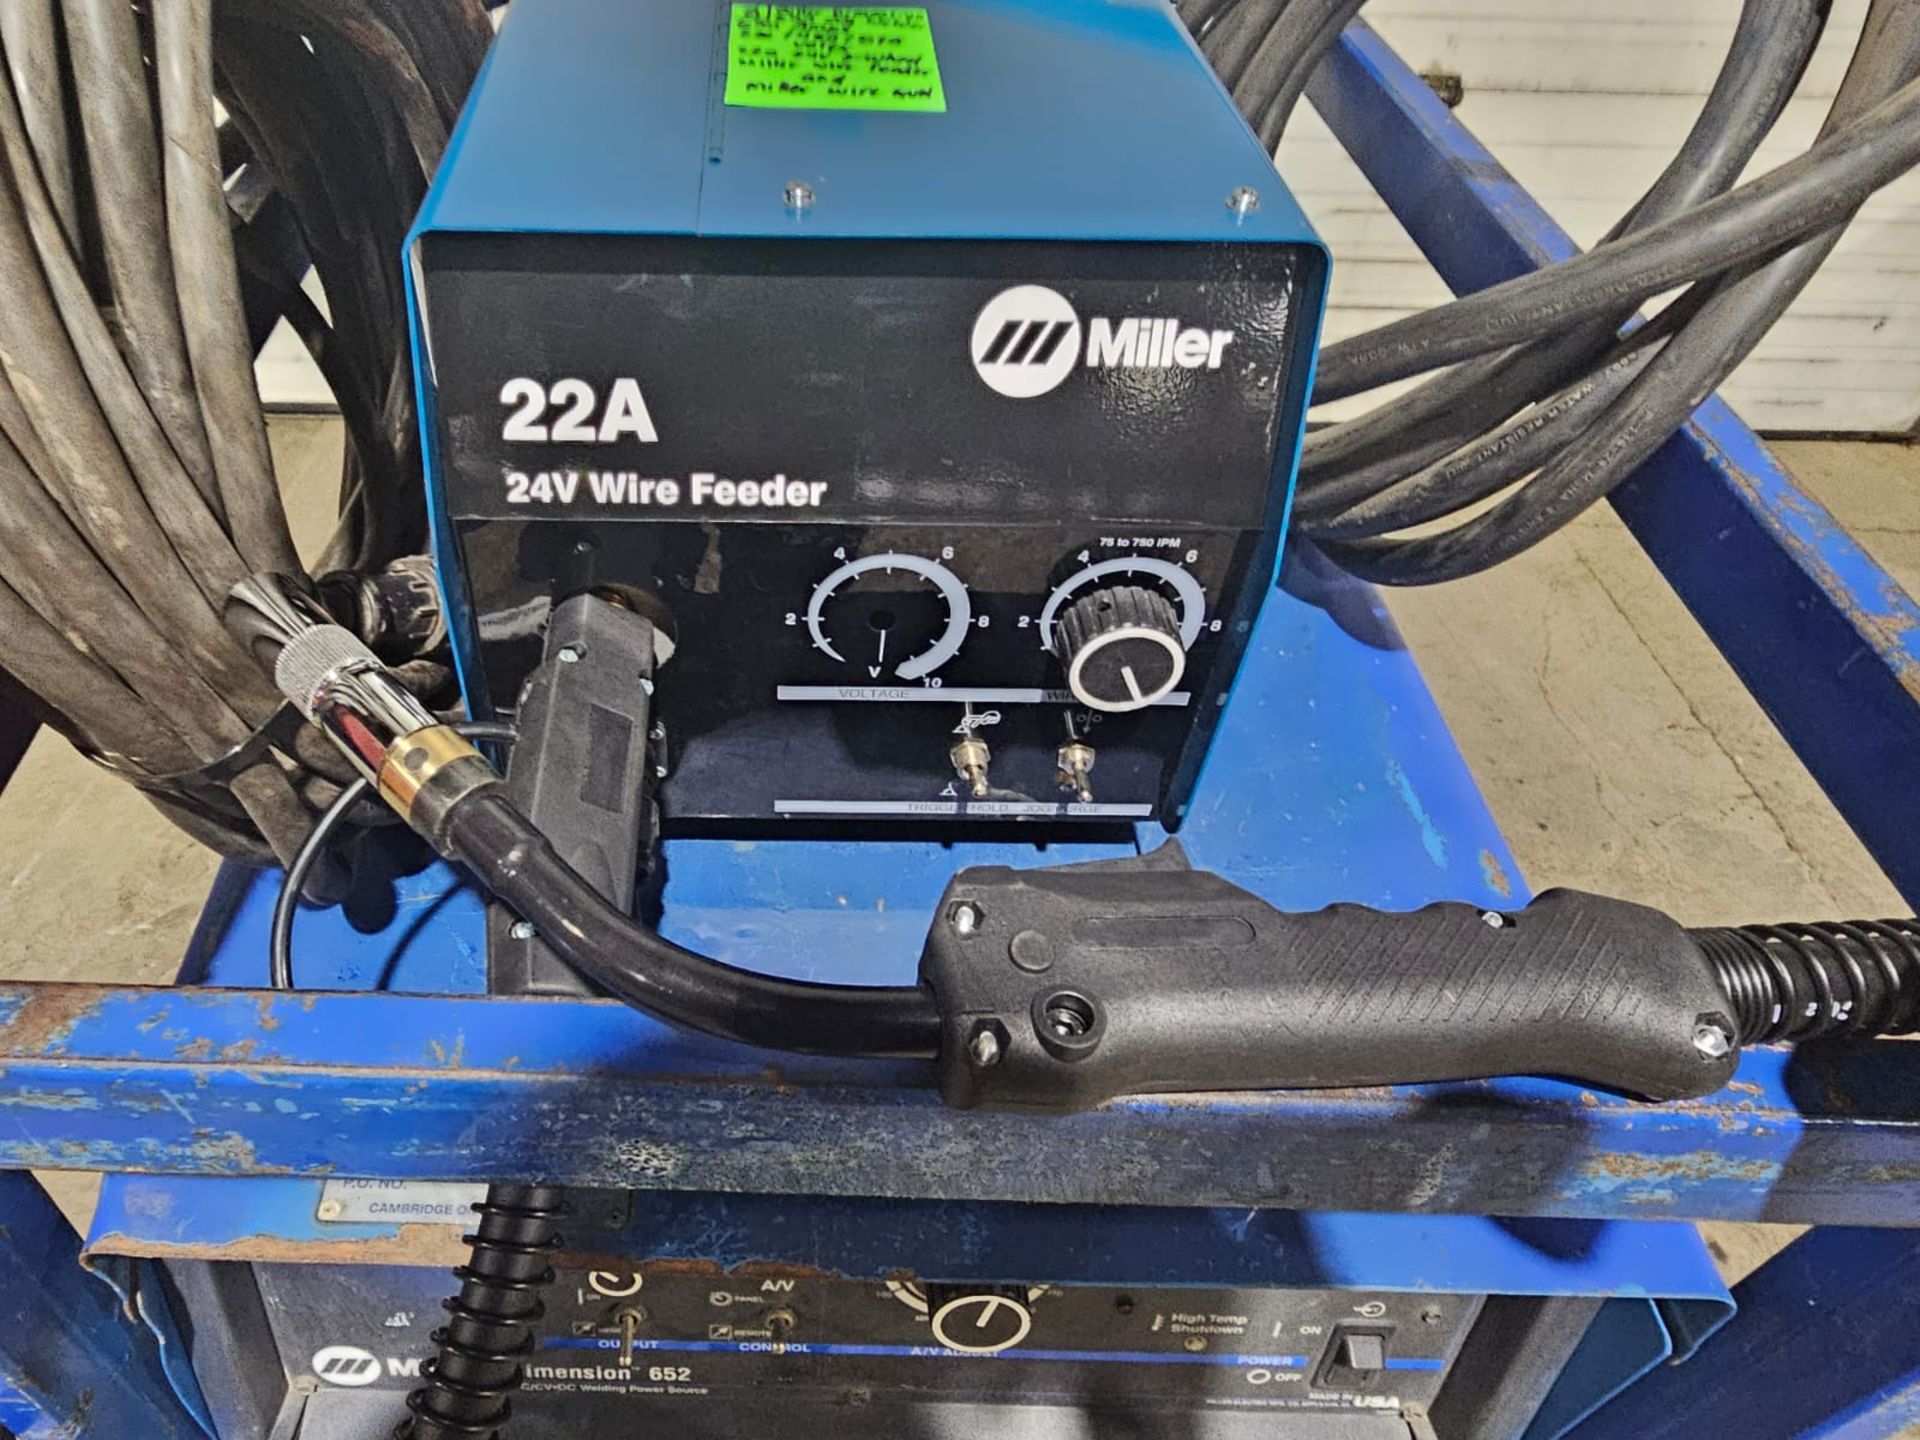 Miller Dimension 652 Mig Welder 650 Amp Mig Tig Stick Multi Process Power Source with 22A Wire - Image 6 of 8